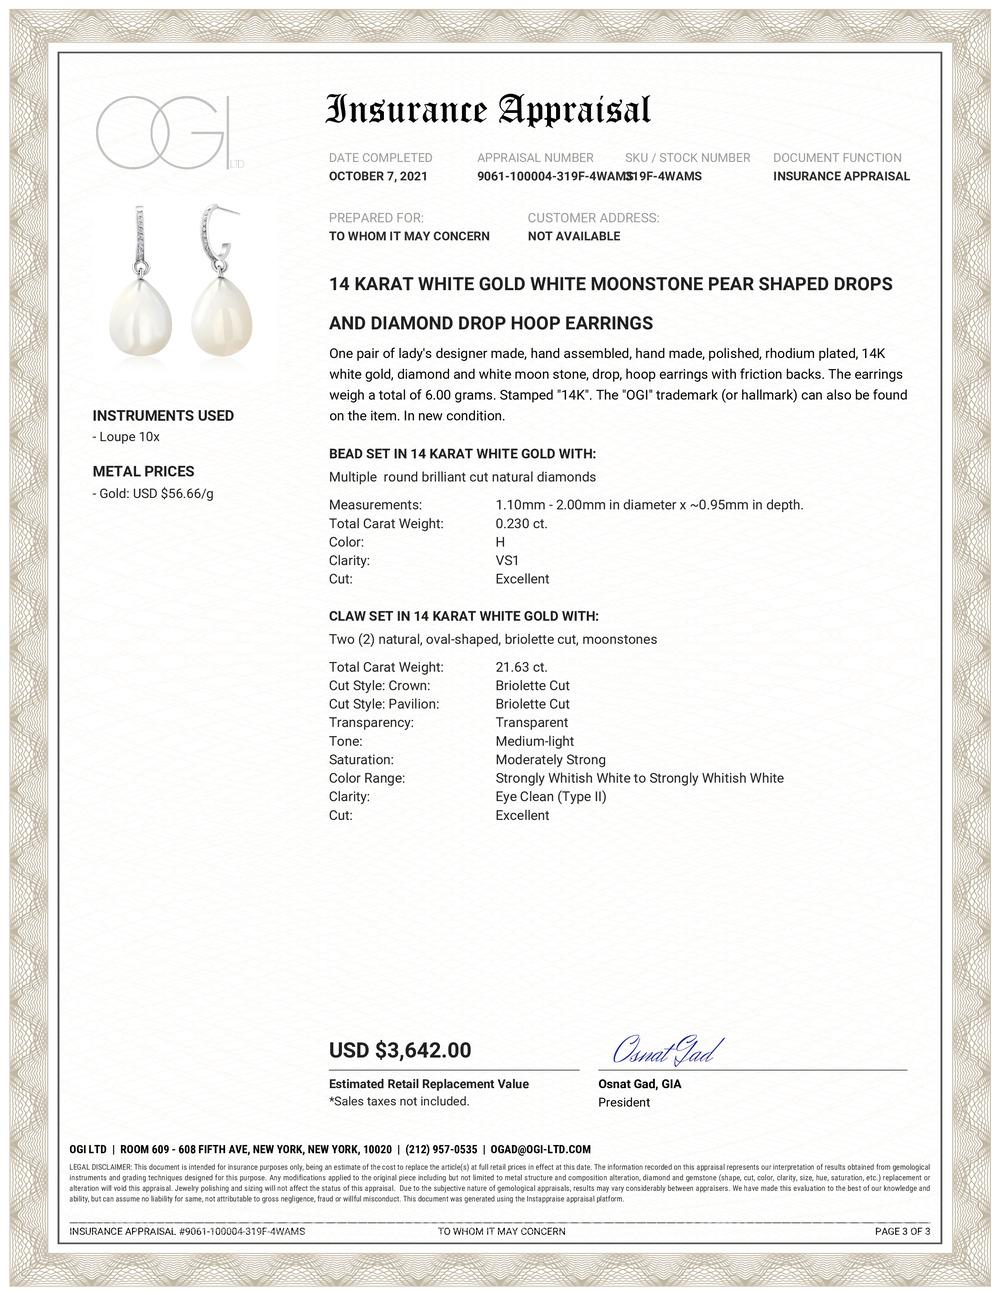 Fourteen karats white gold drop hoop earrings 
White moonstone drops weighing 21.63 carat 
Diamonds weighing 0.23
New Earrings 
Earrings are hanging of a straight post with friction push backs  
Handmade in the USA